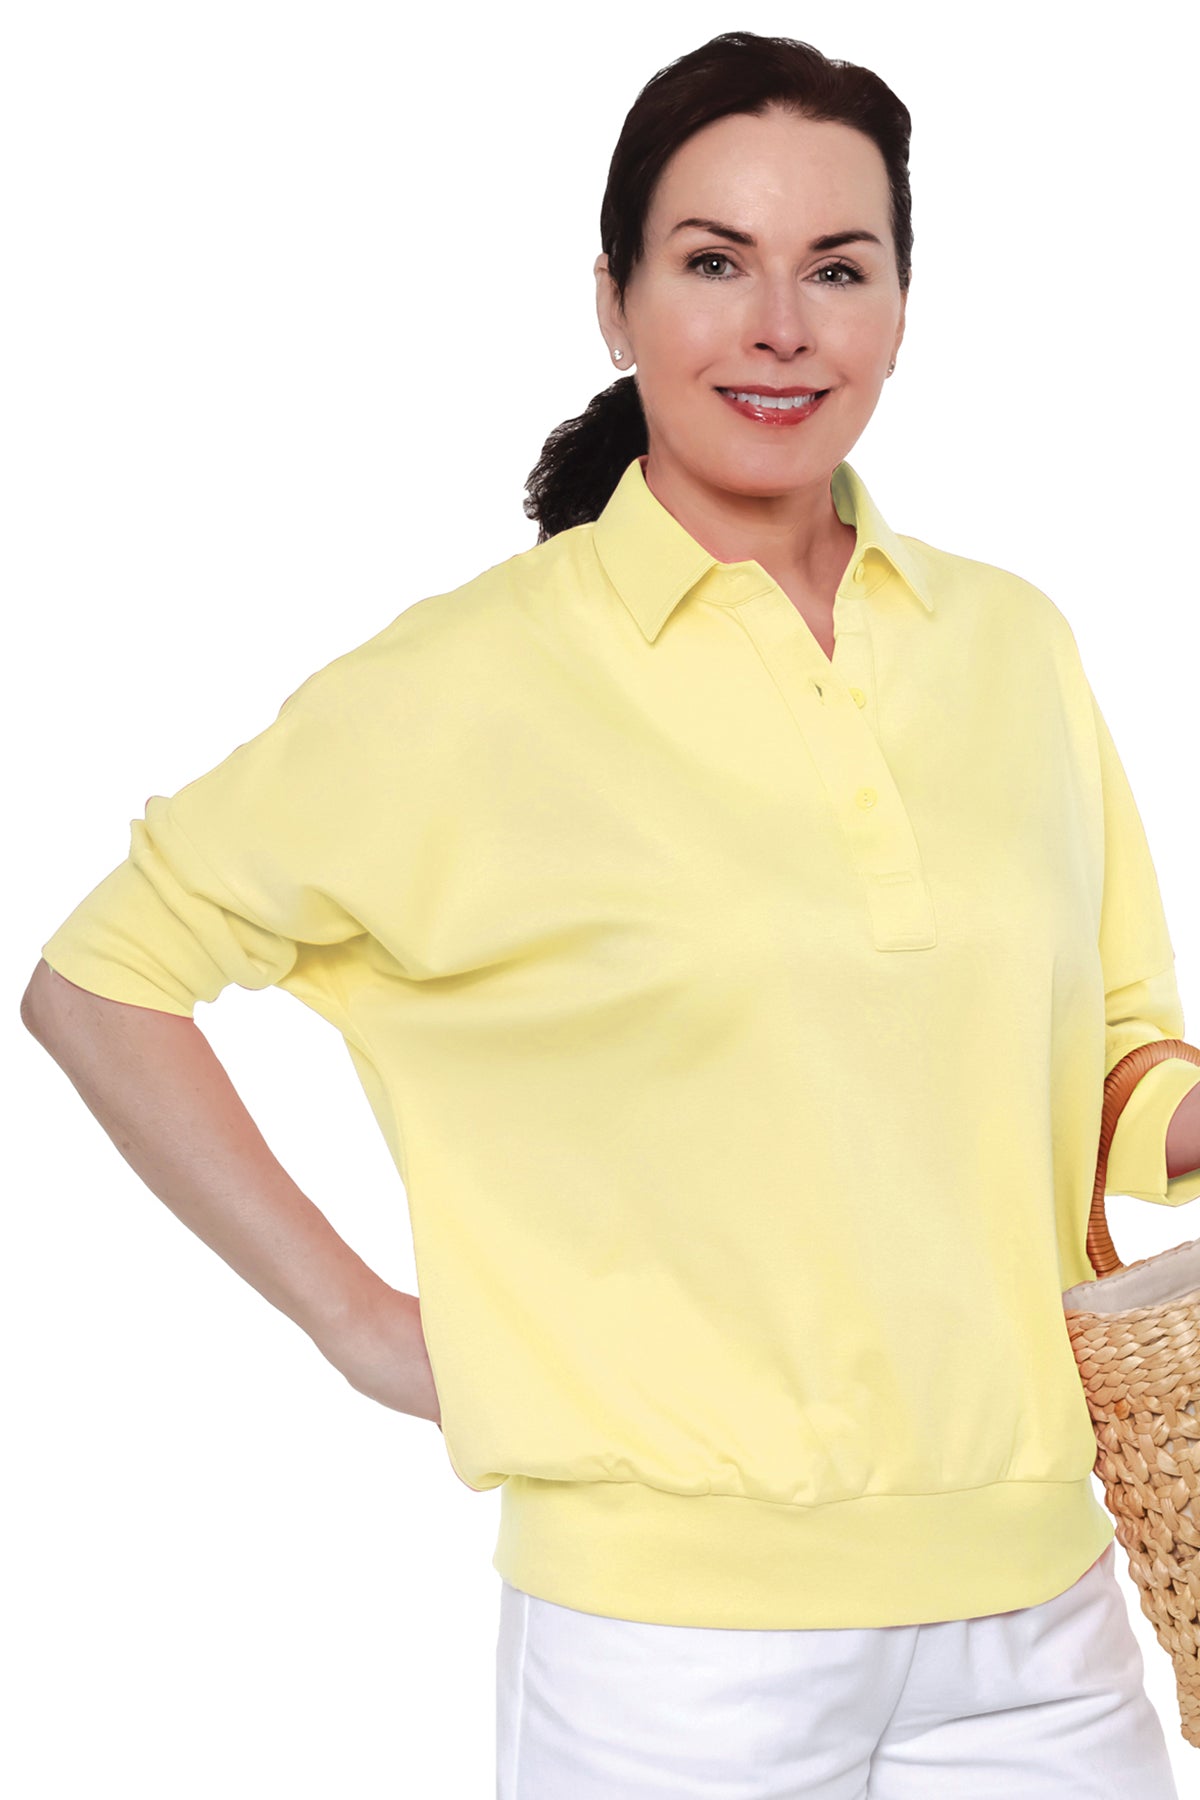 One Size Fits All Solid Polo| Lemonade 509 - Leonlevin